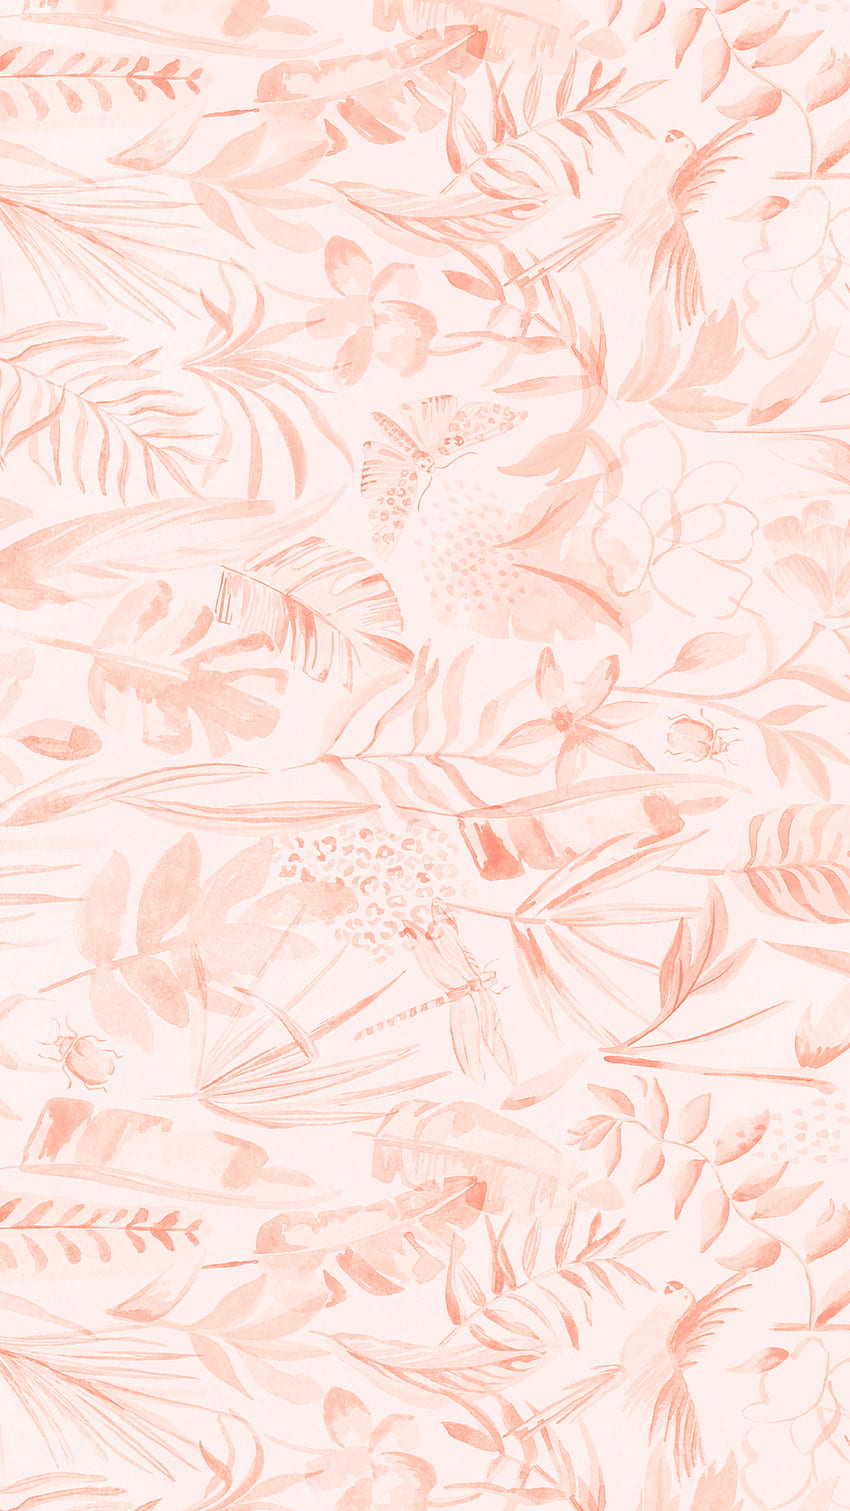 Peachy pink iPhone wallpaper with hand drawn jungle animals and plants - Blush